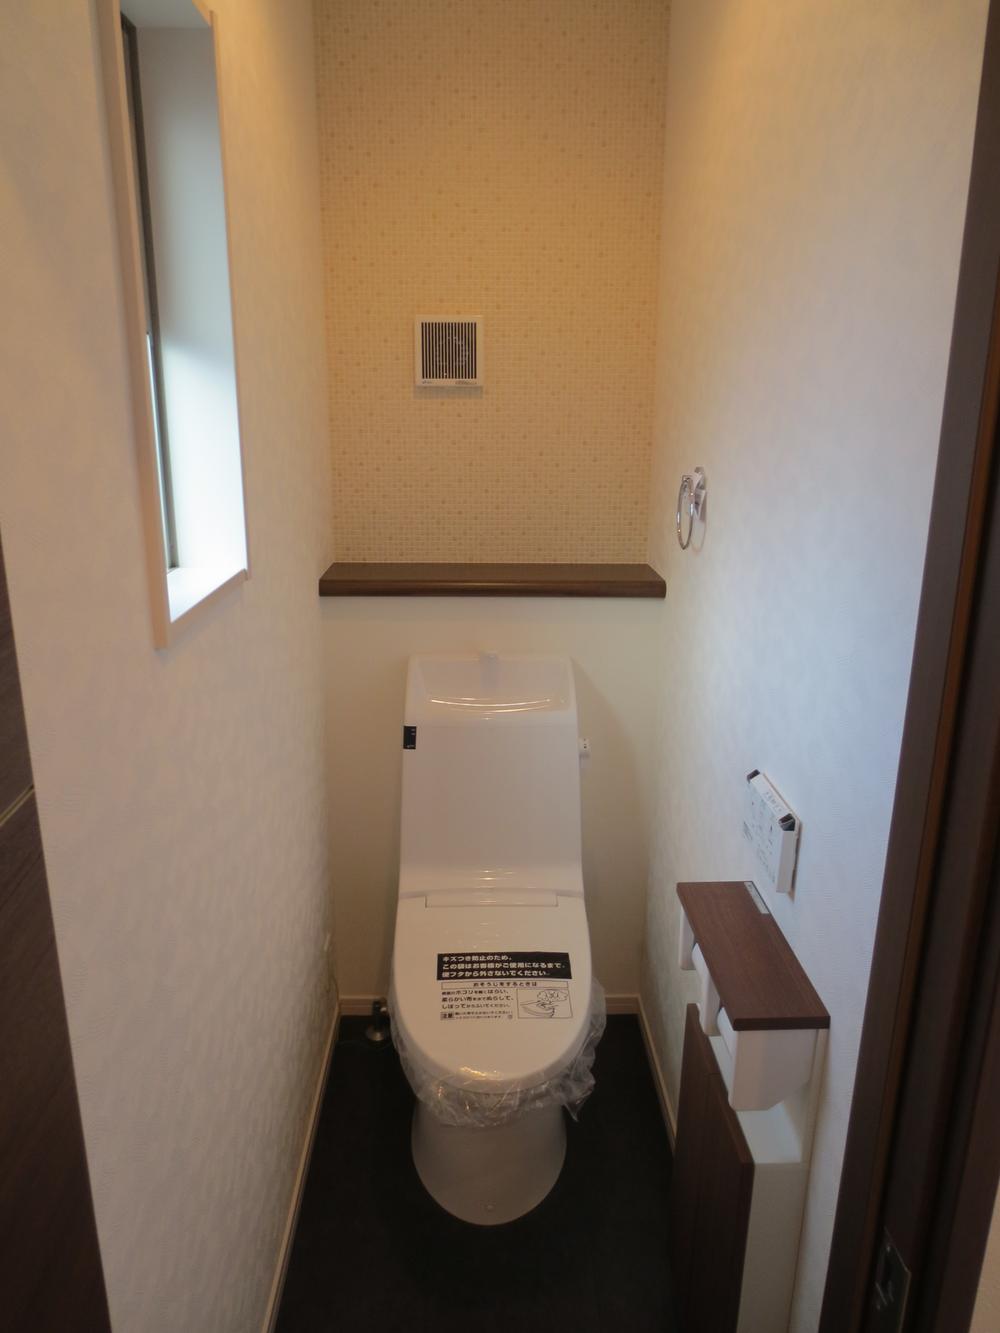 Other Equipment. First floor Washlet With the second floor heating toilet seat